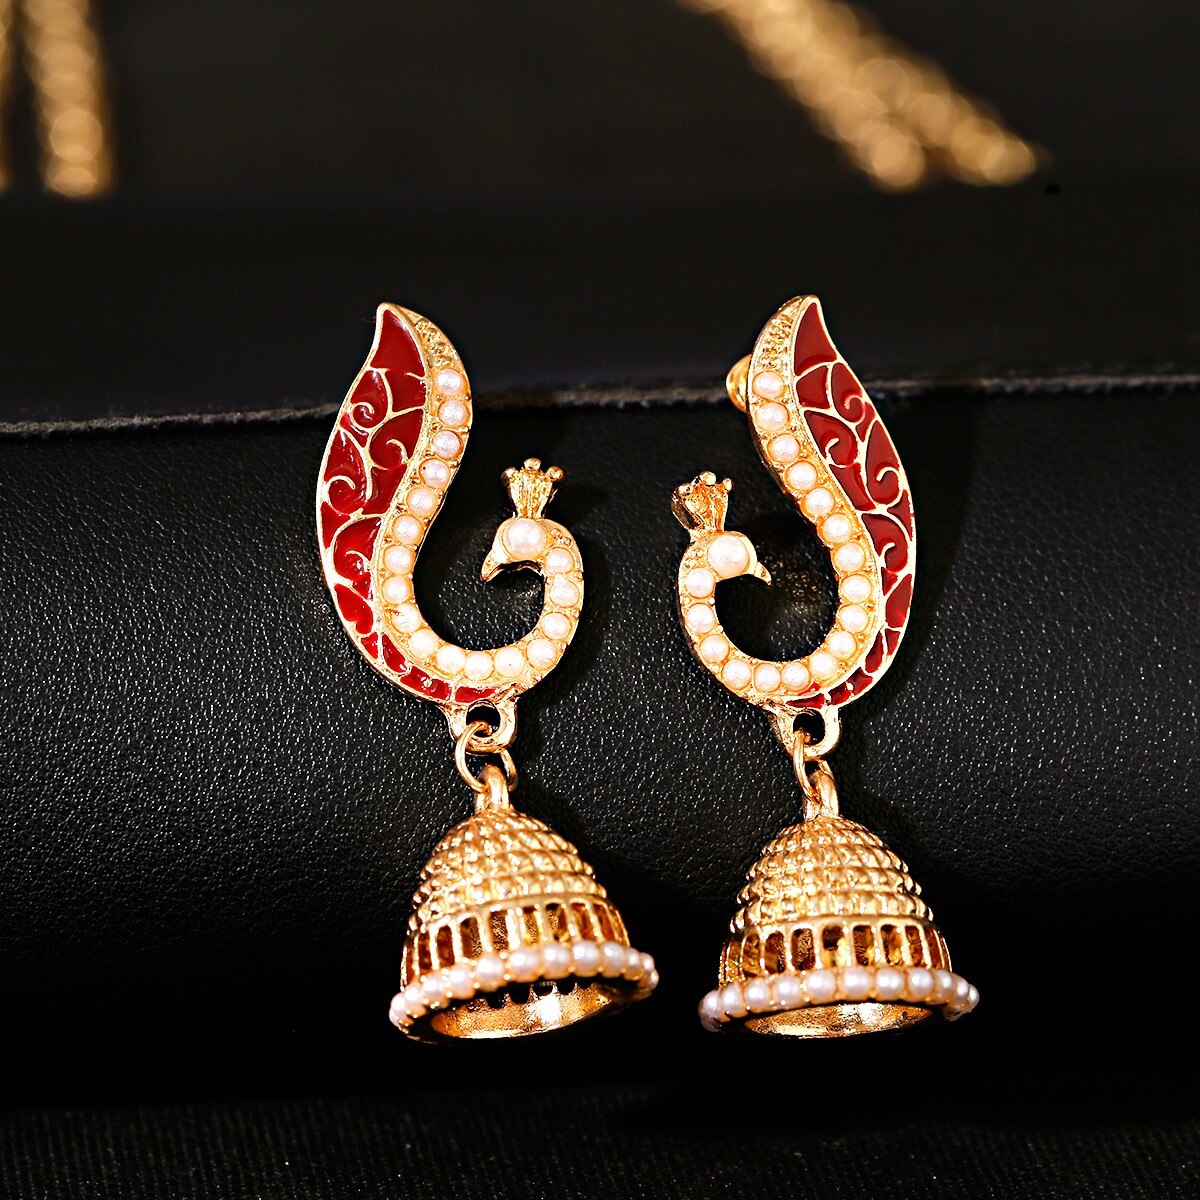 12-PairsLot-Boho-Afghan-Ethnic-Earrings-For-Women-Pendient-Pink-Gold-Silver-Color-Bell-Ladies-Indian-3256803995211369-4